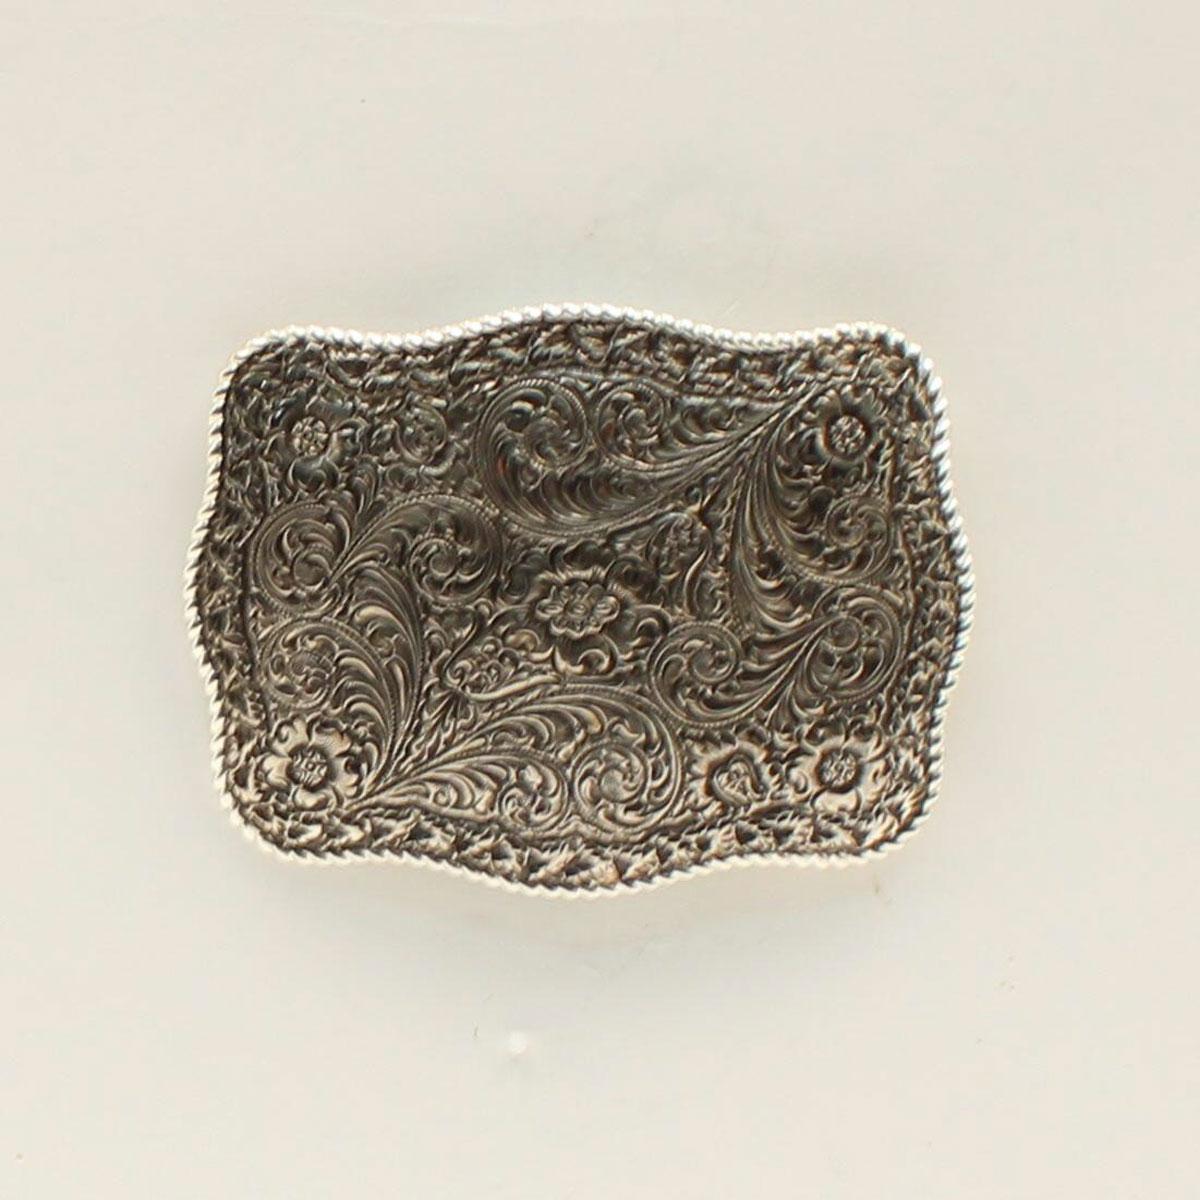 CRUMRINE RECTANGLE BUCKLE FLORAL SCROLLING ROPED EDGE